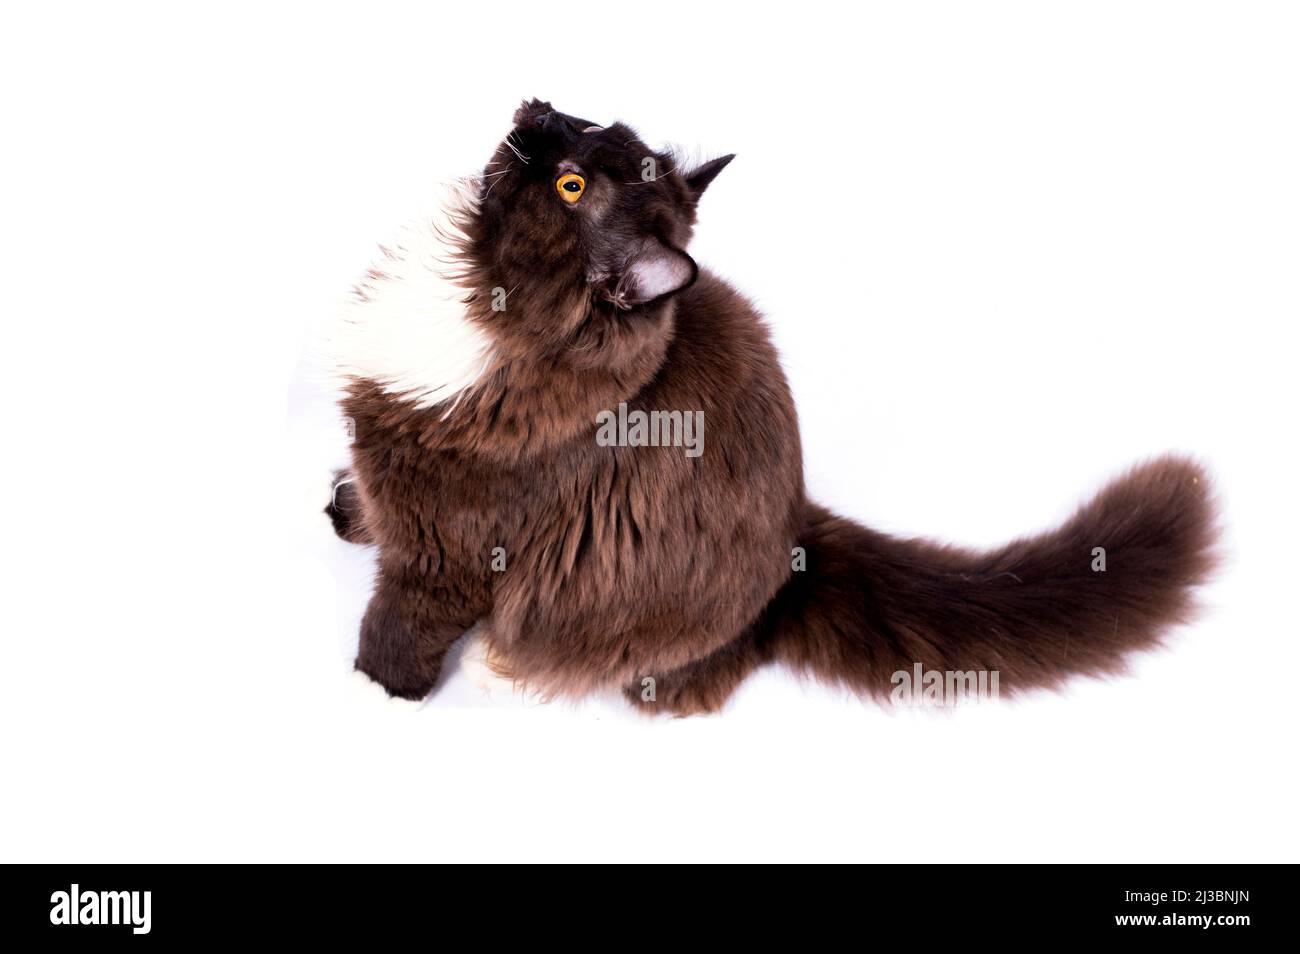 long-haired brown Scottish cat on a white background, isolated image, beautiful domestic cats, cats in the house, pets, Stock Photo